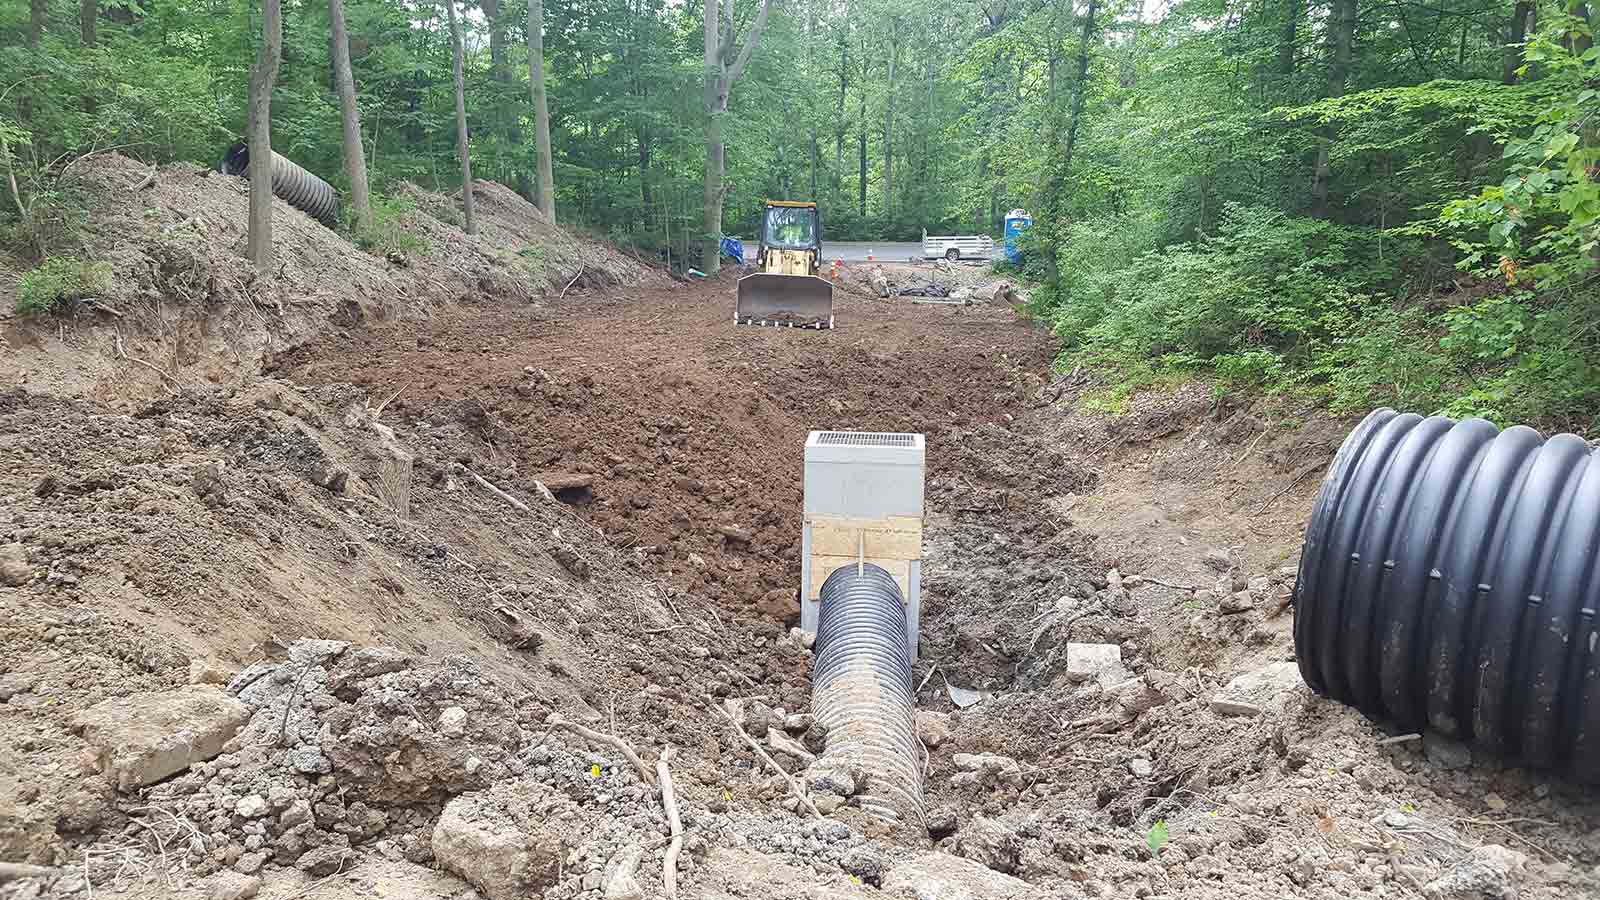 Pipes being installed during a ravine restoration.